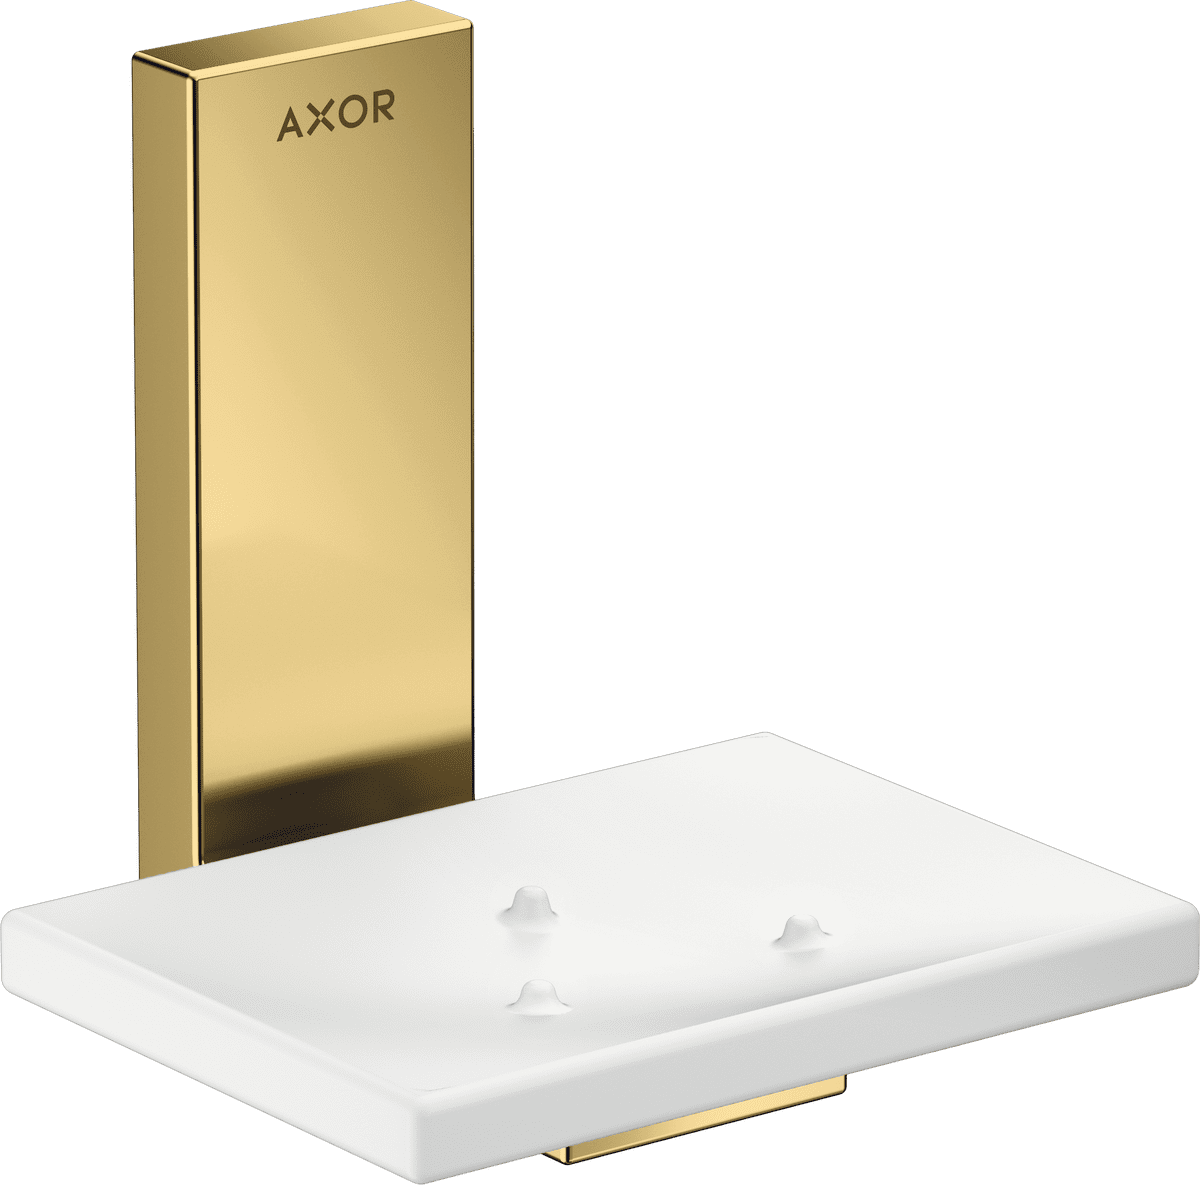 Picture of HANSGROHE AXOR Universal Rectangular Soap dish #42605990 - Polished Gold Optic